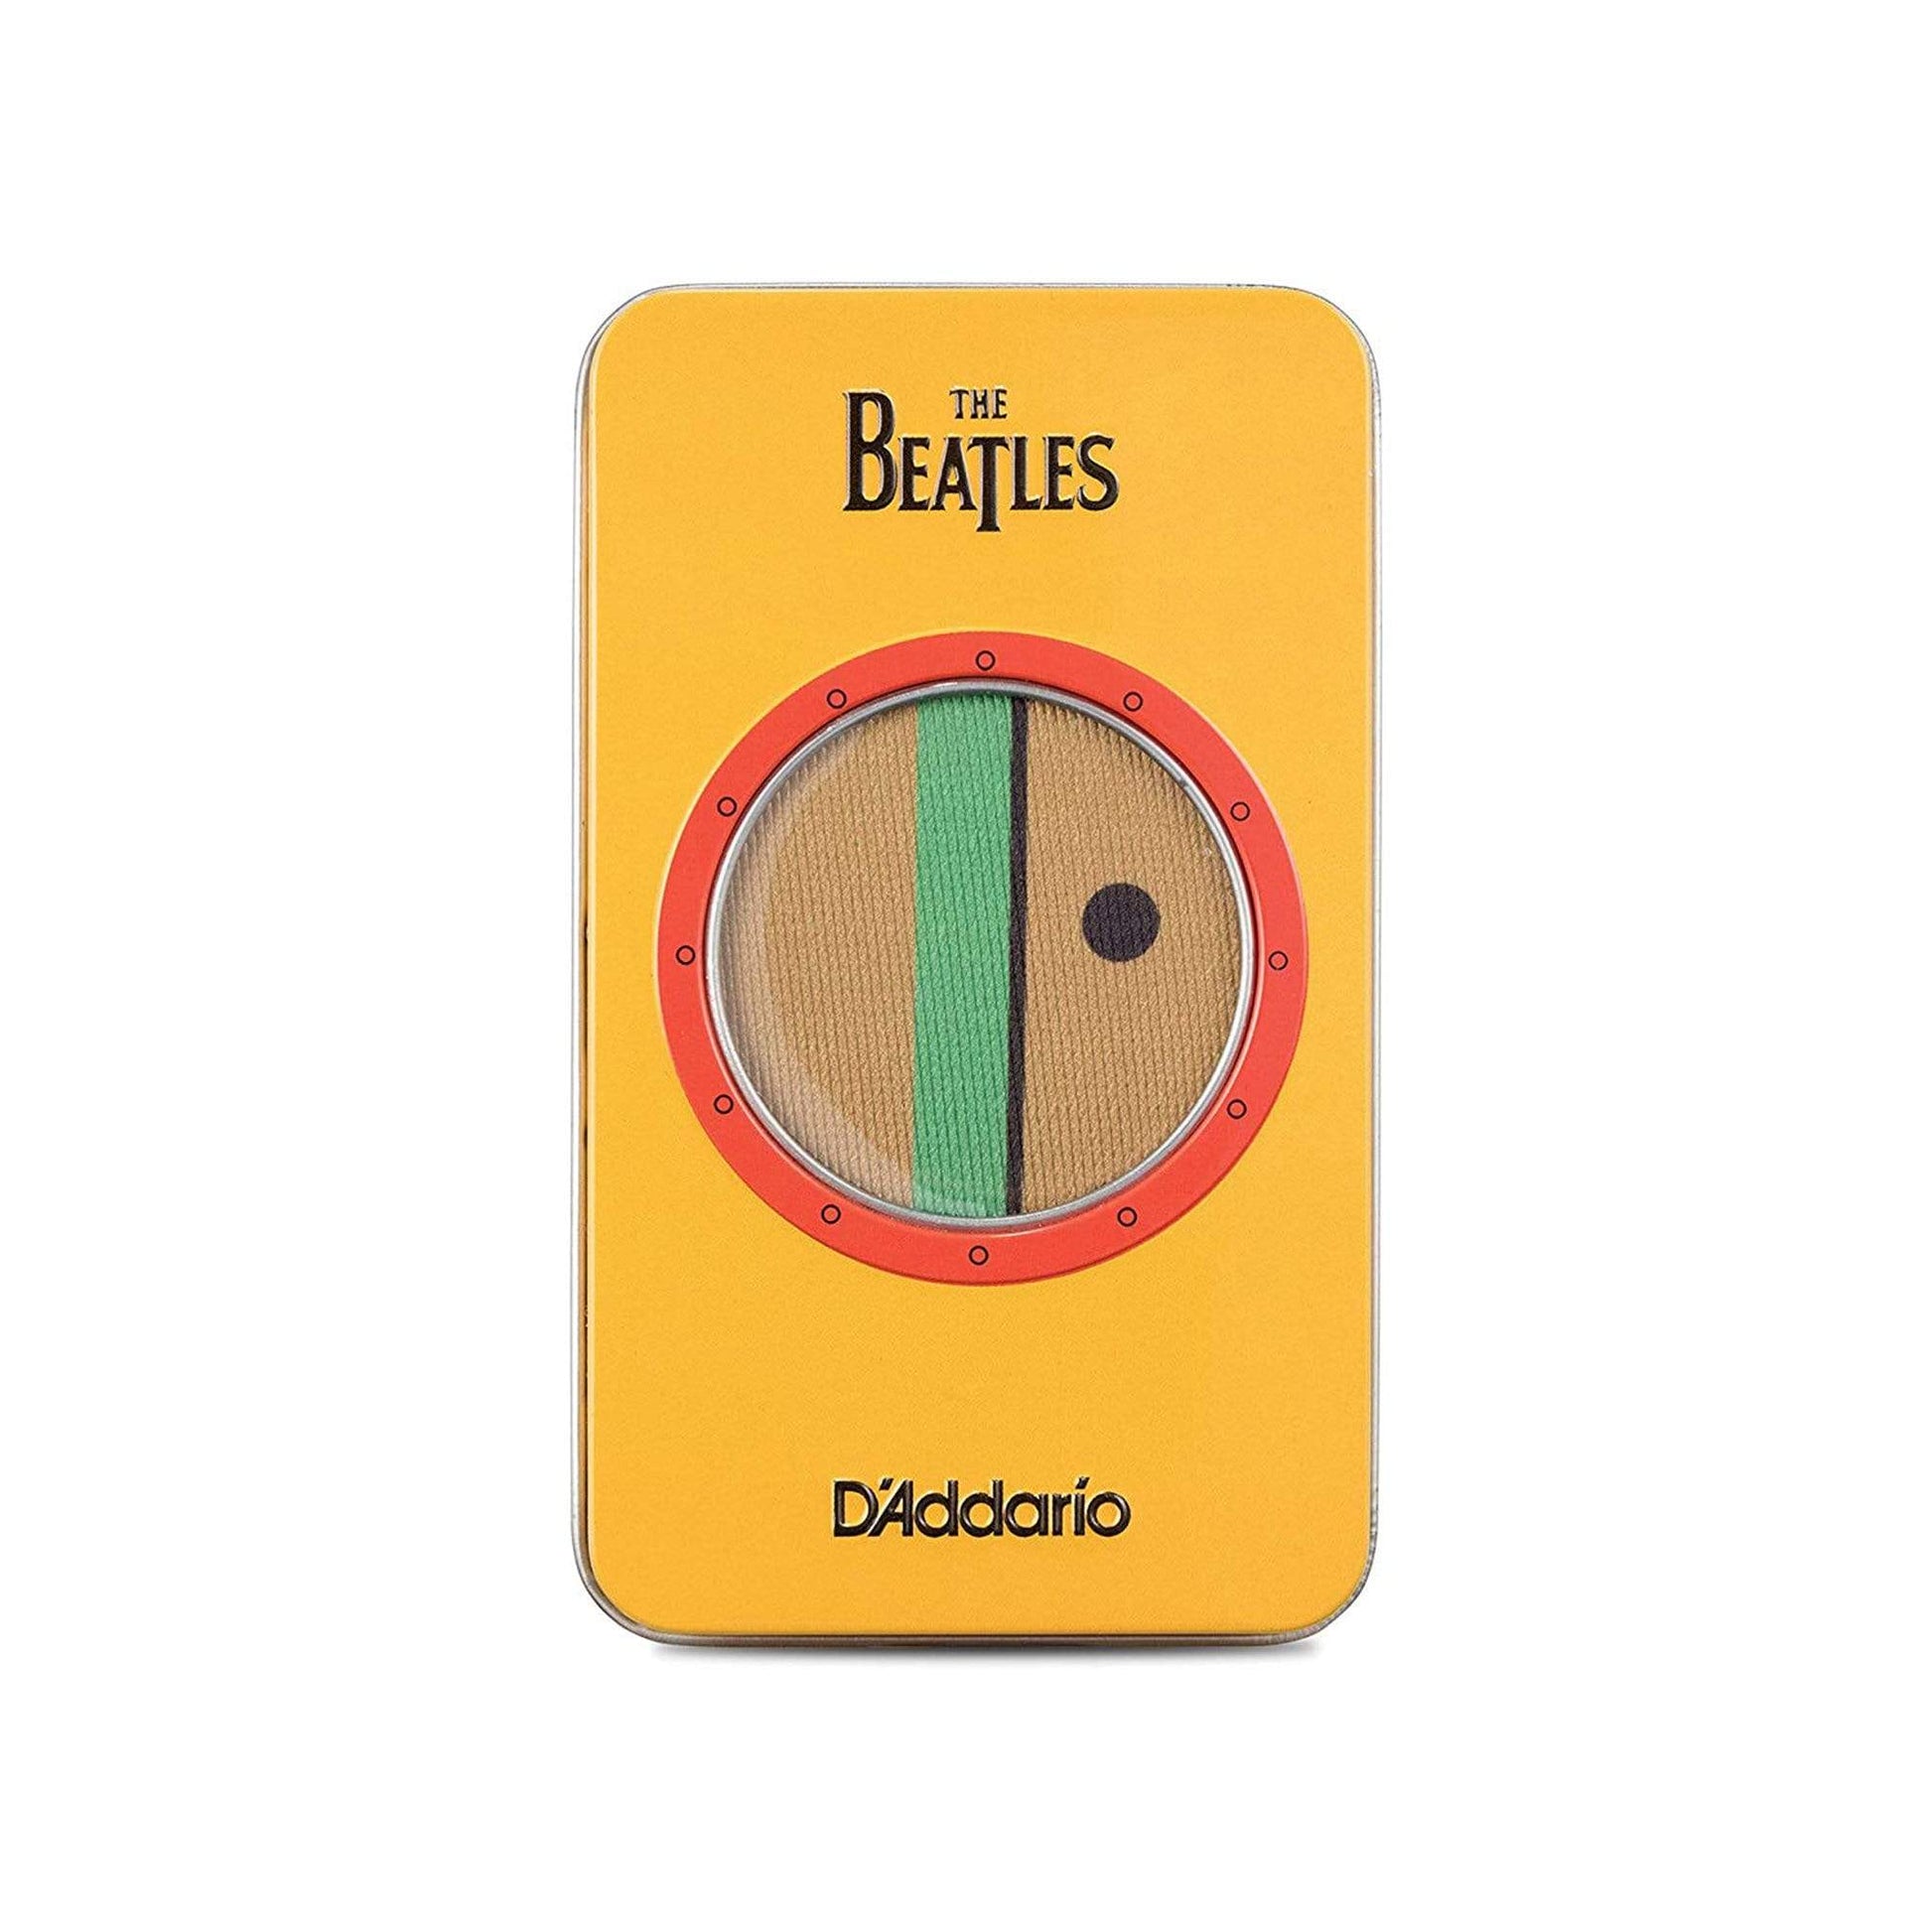 D'Addario Beatles Yellow Submarine 50th Anniversary Guitar Strap "George" w/Collectible Tin Accessories / Straps